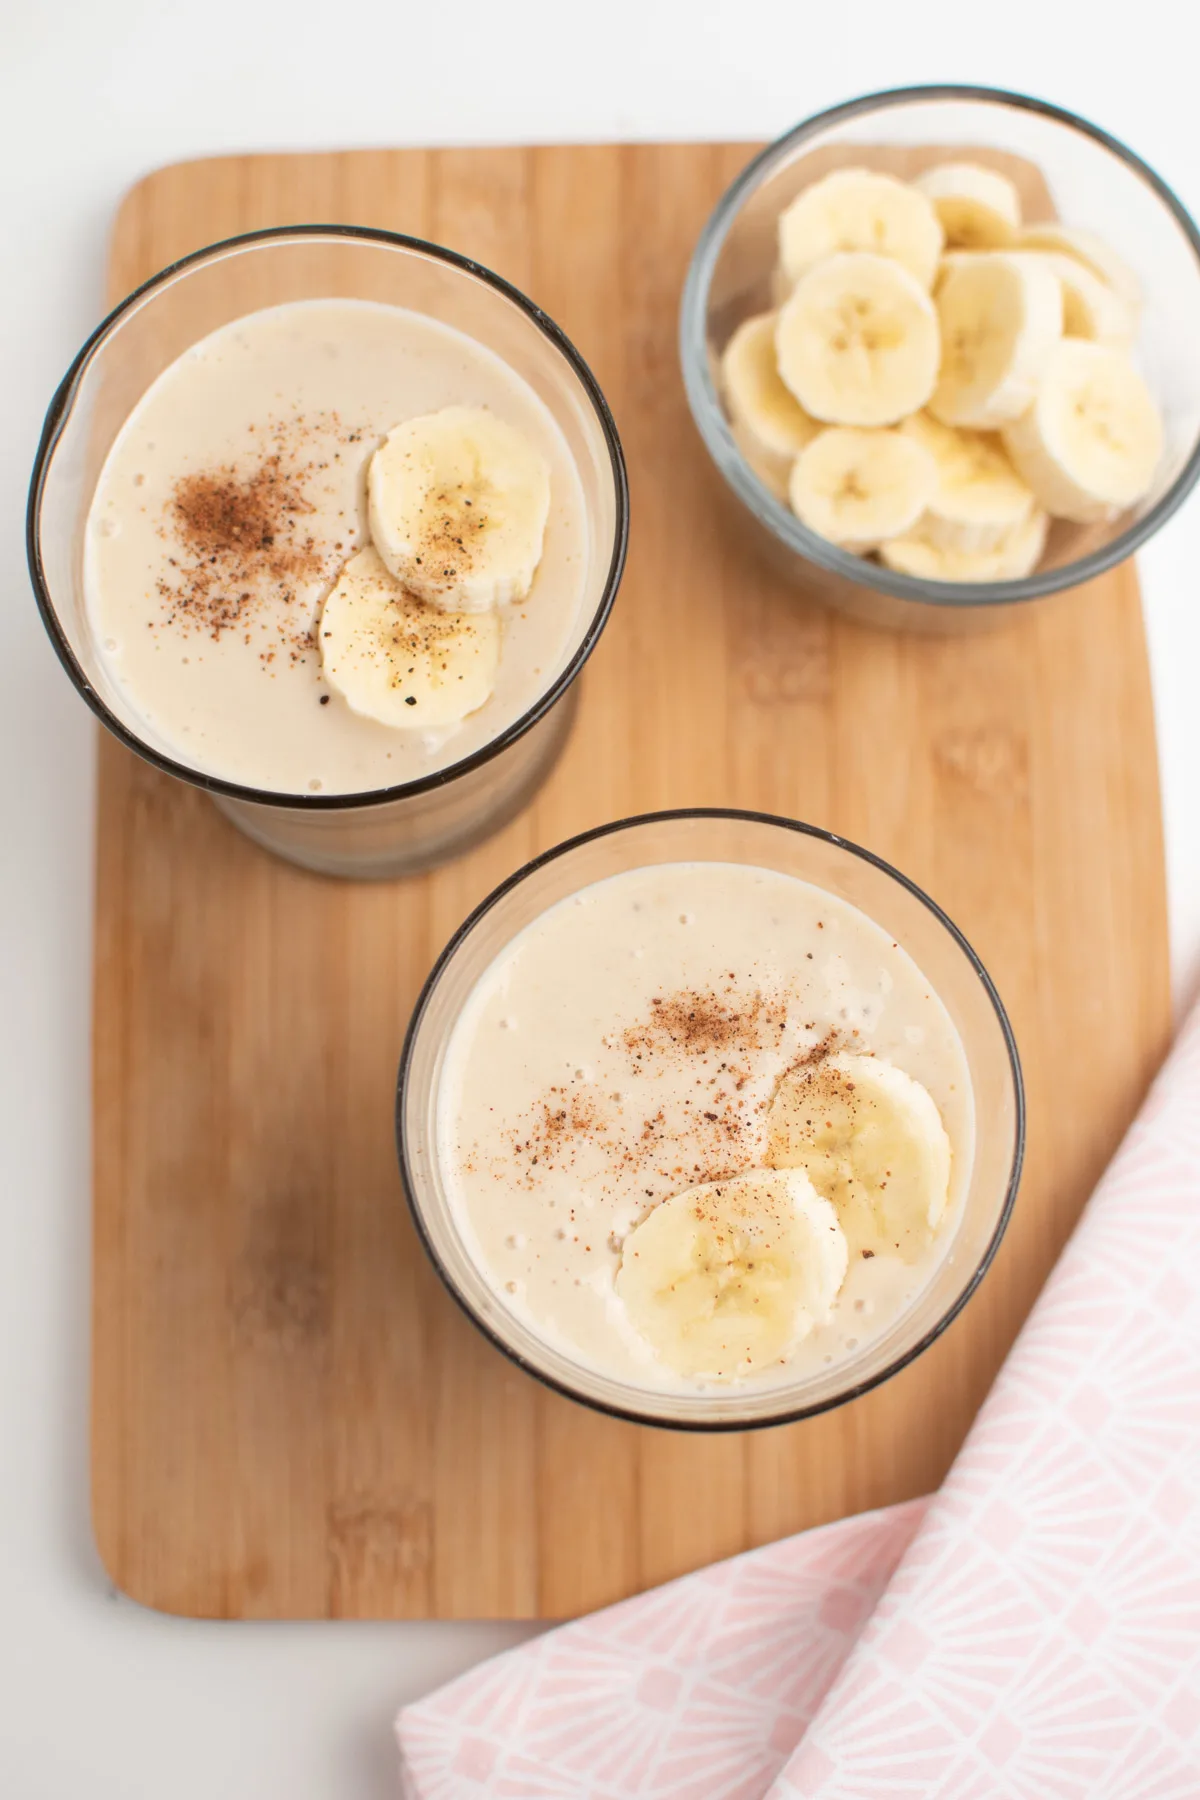 Two glasses of banana smoothie with nutmeg next to container of sliced bananas on cutting board.